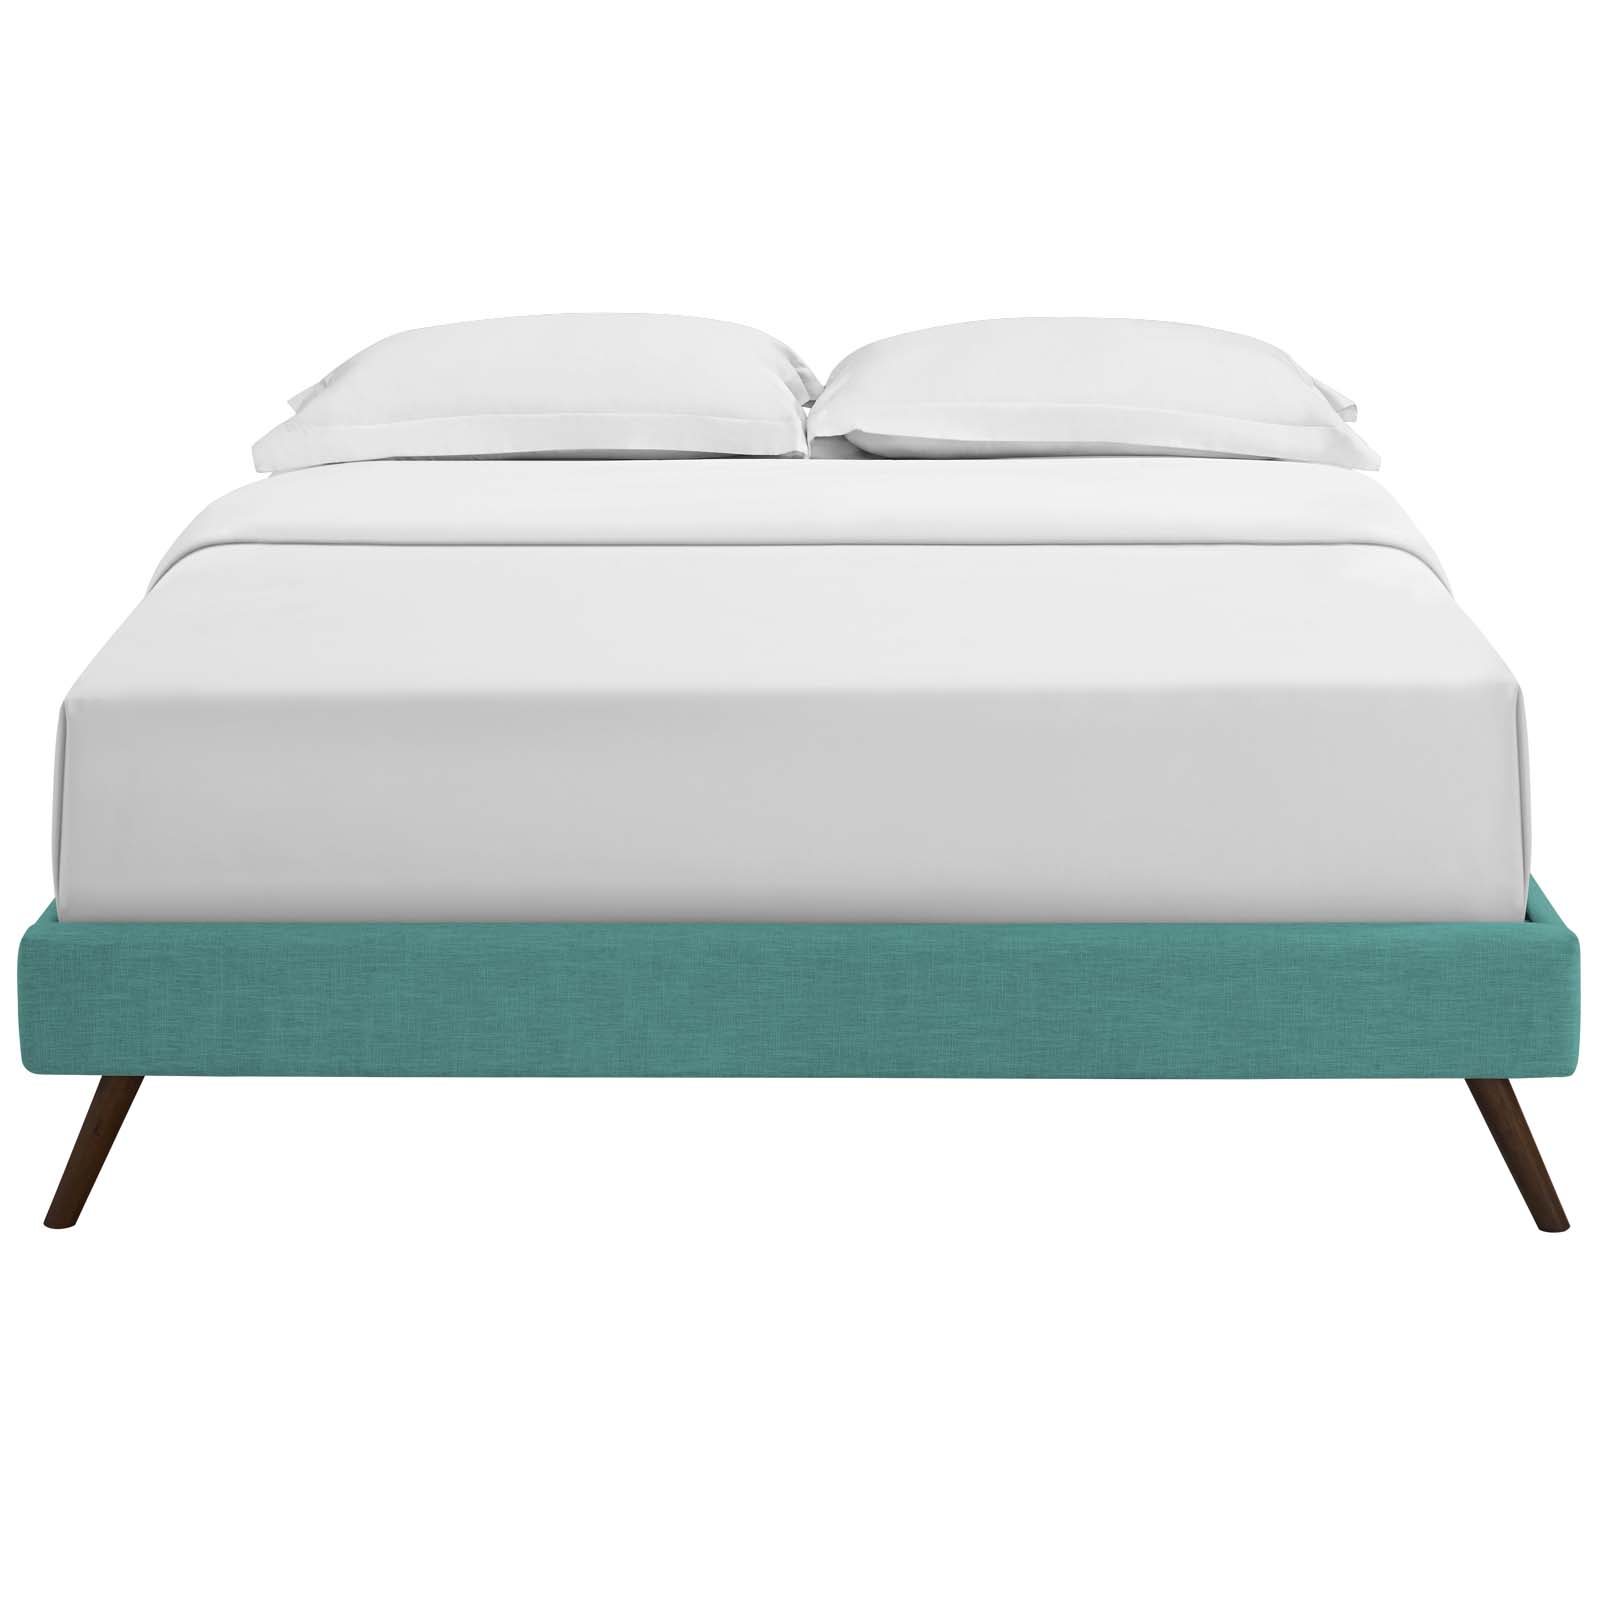 Loryn Queen Fabric Bed Frame, Teal Bed Frame Queen